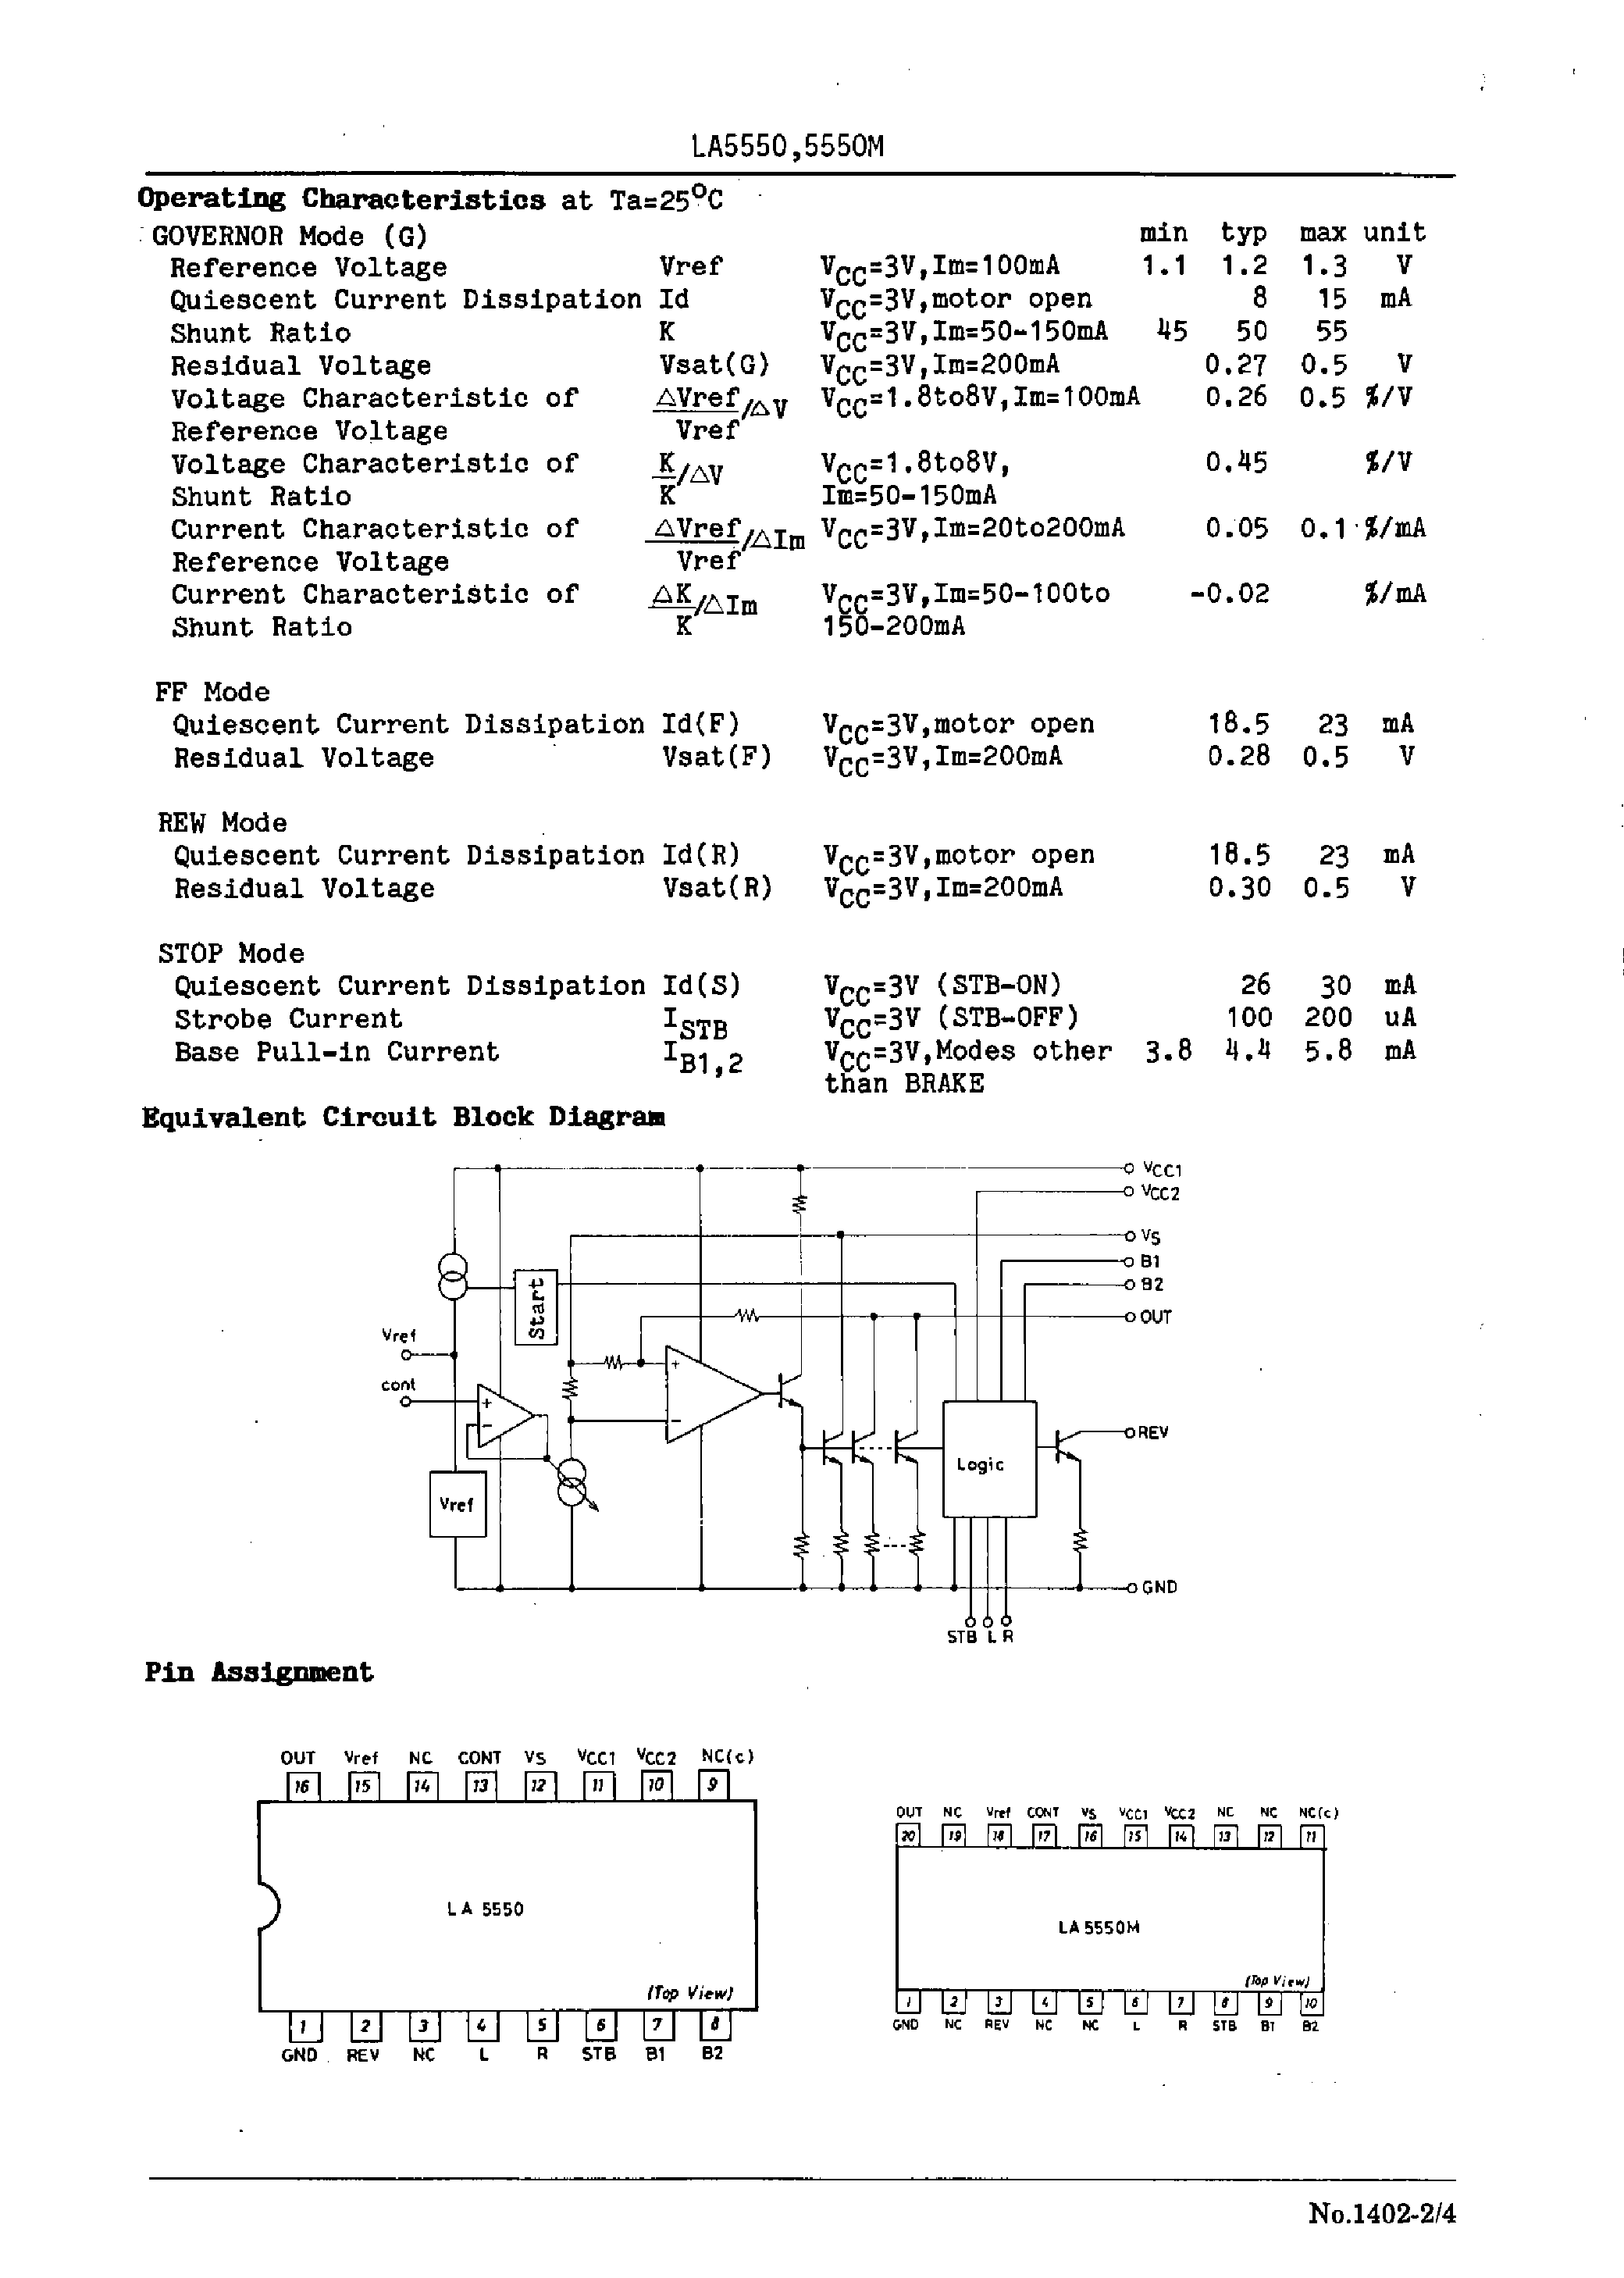 Datasheet LA5550 - Low-Voltage DC Motor Speed Controller with Logic Circuit page 2